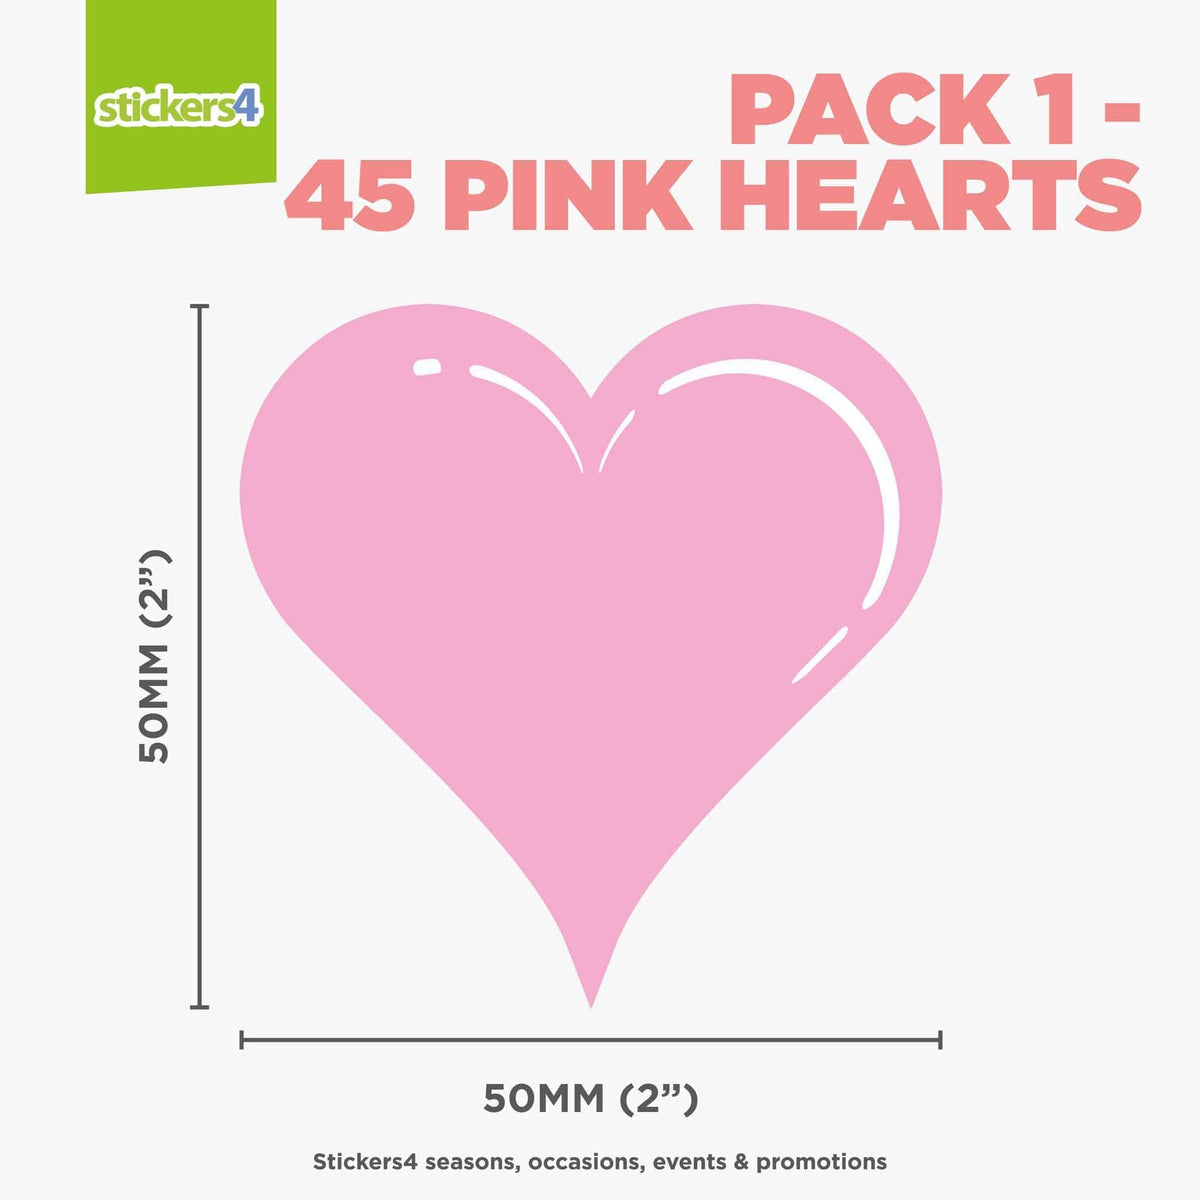 Static Cling Hearts: Pack 1 (45 Hearts @ 50mm)